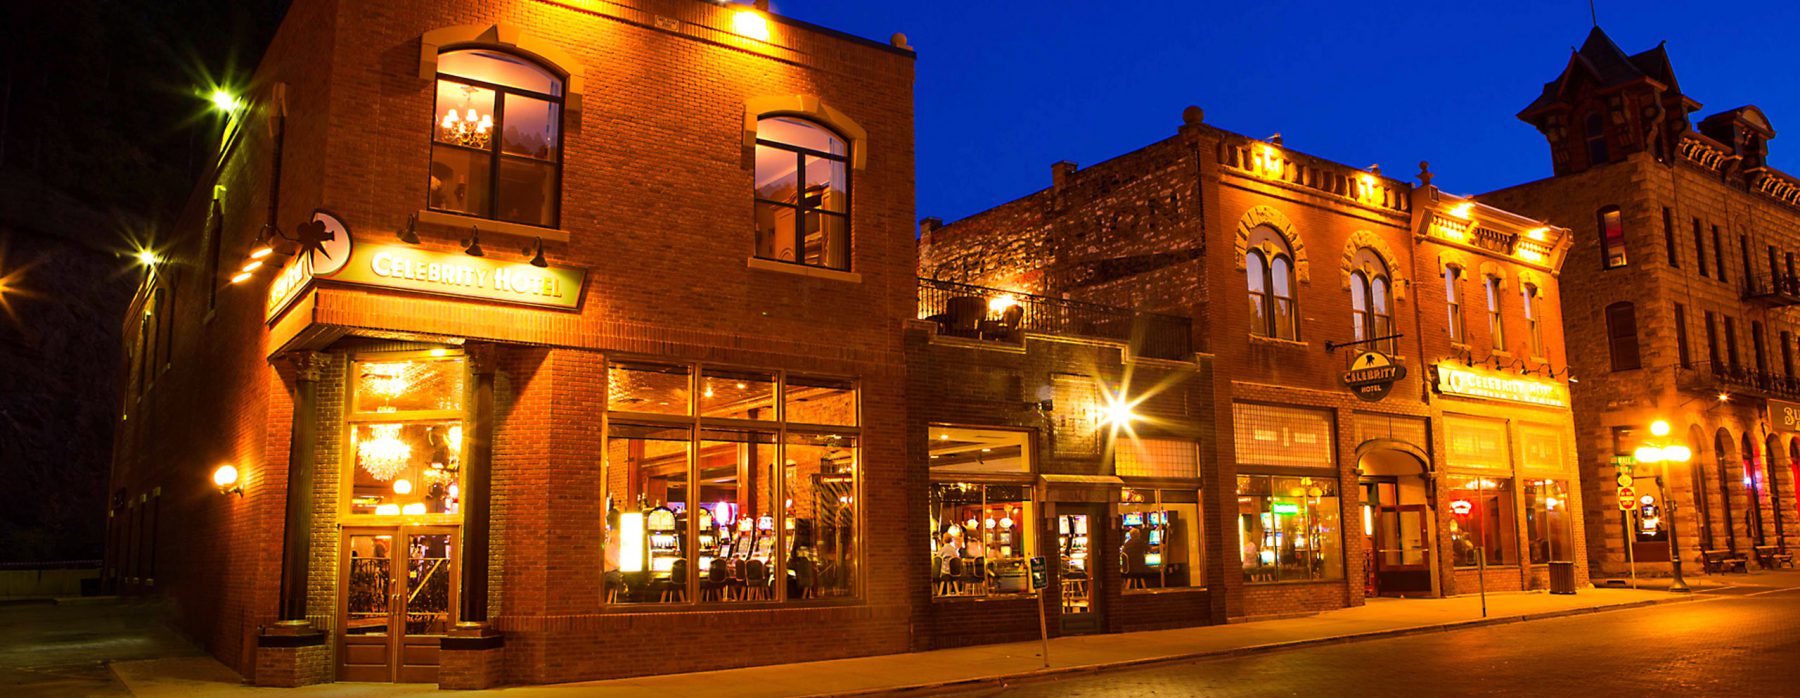 Exterior photo of a hotel in Deadwood SD at night with lights illuminating the building